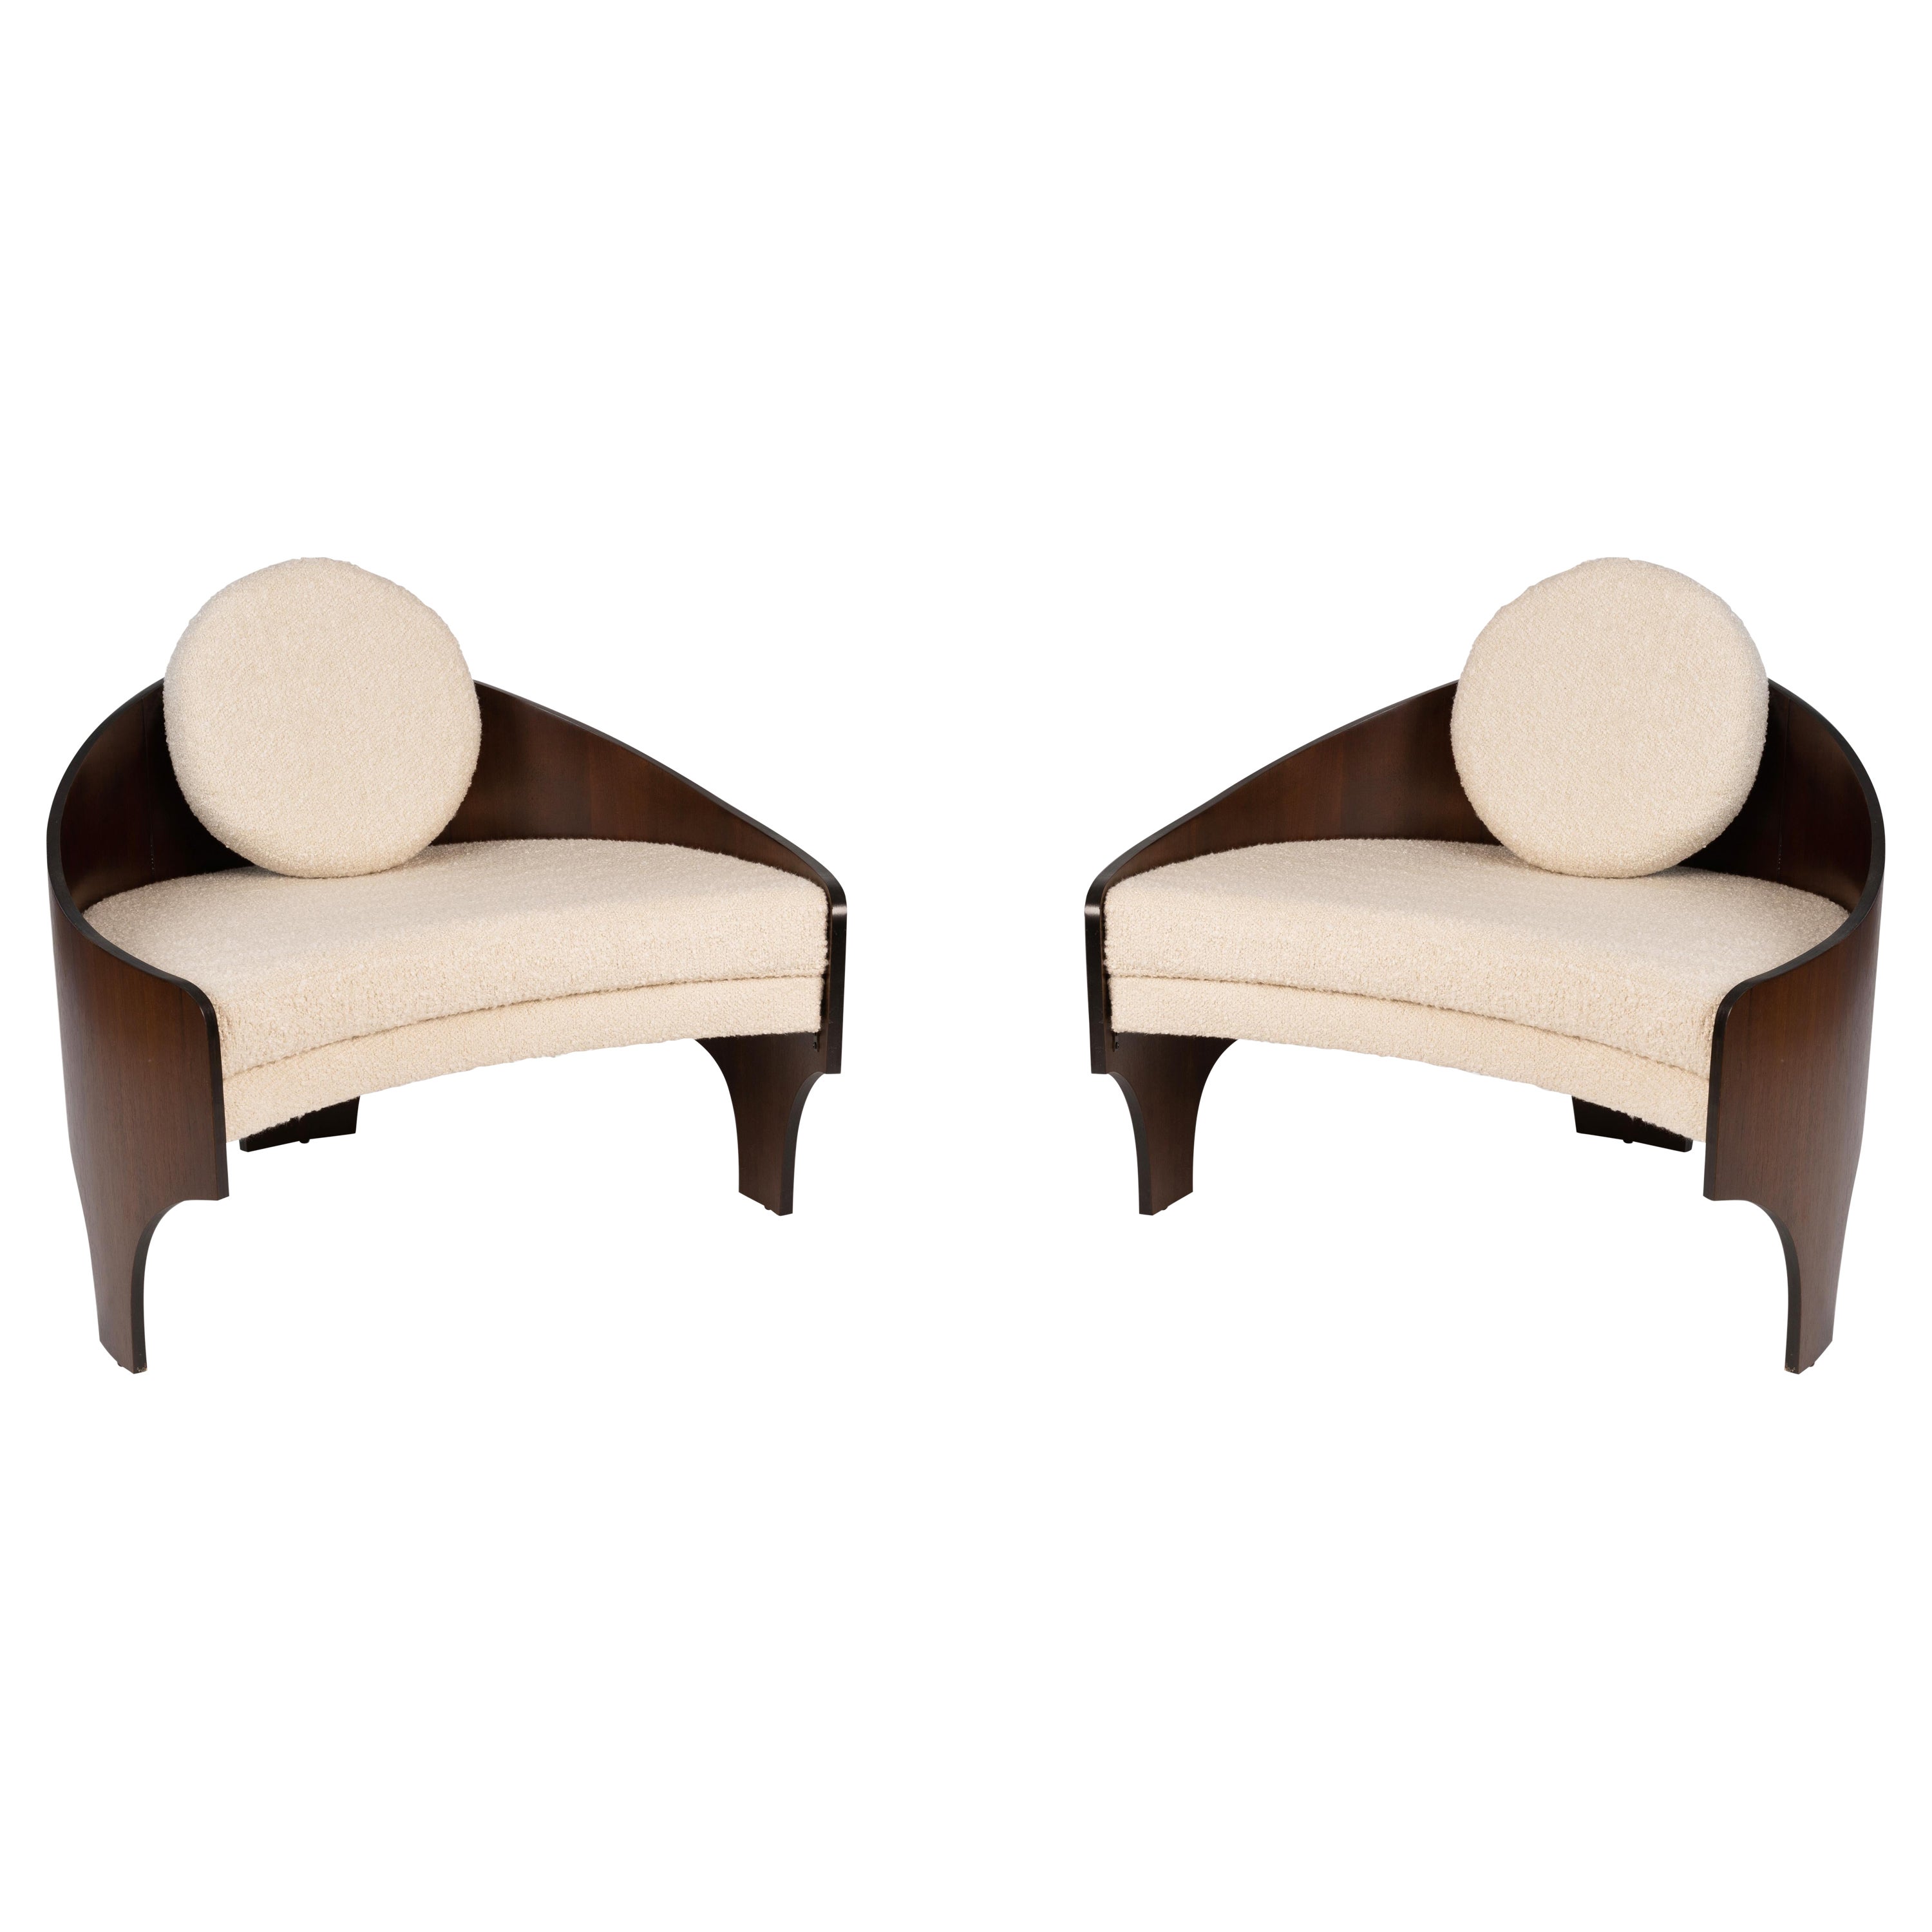 Henry Glass Pair of 1960's 'Intimate Island' Lounge Chairs